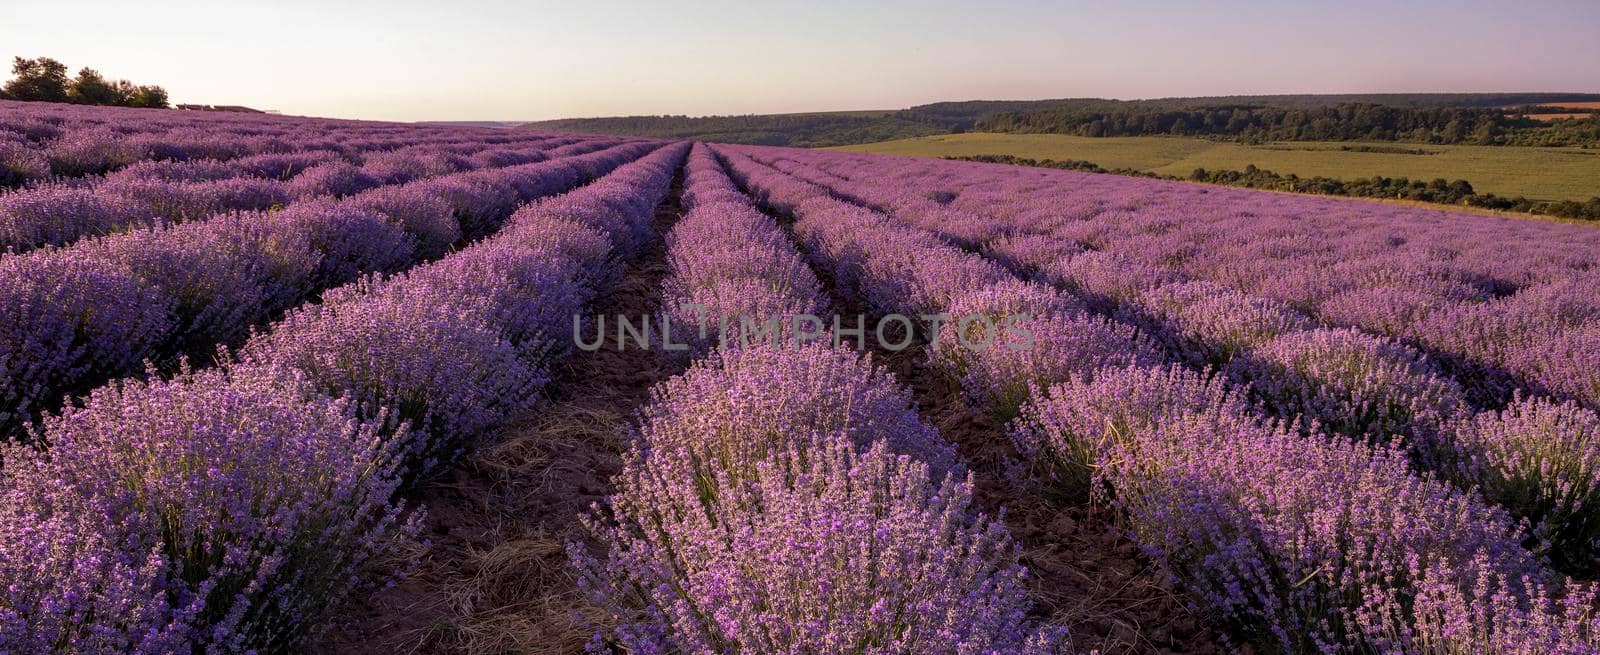 Lavender flower blooming scented fields in endless rows. by EdVal